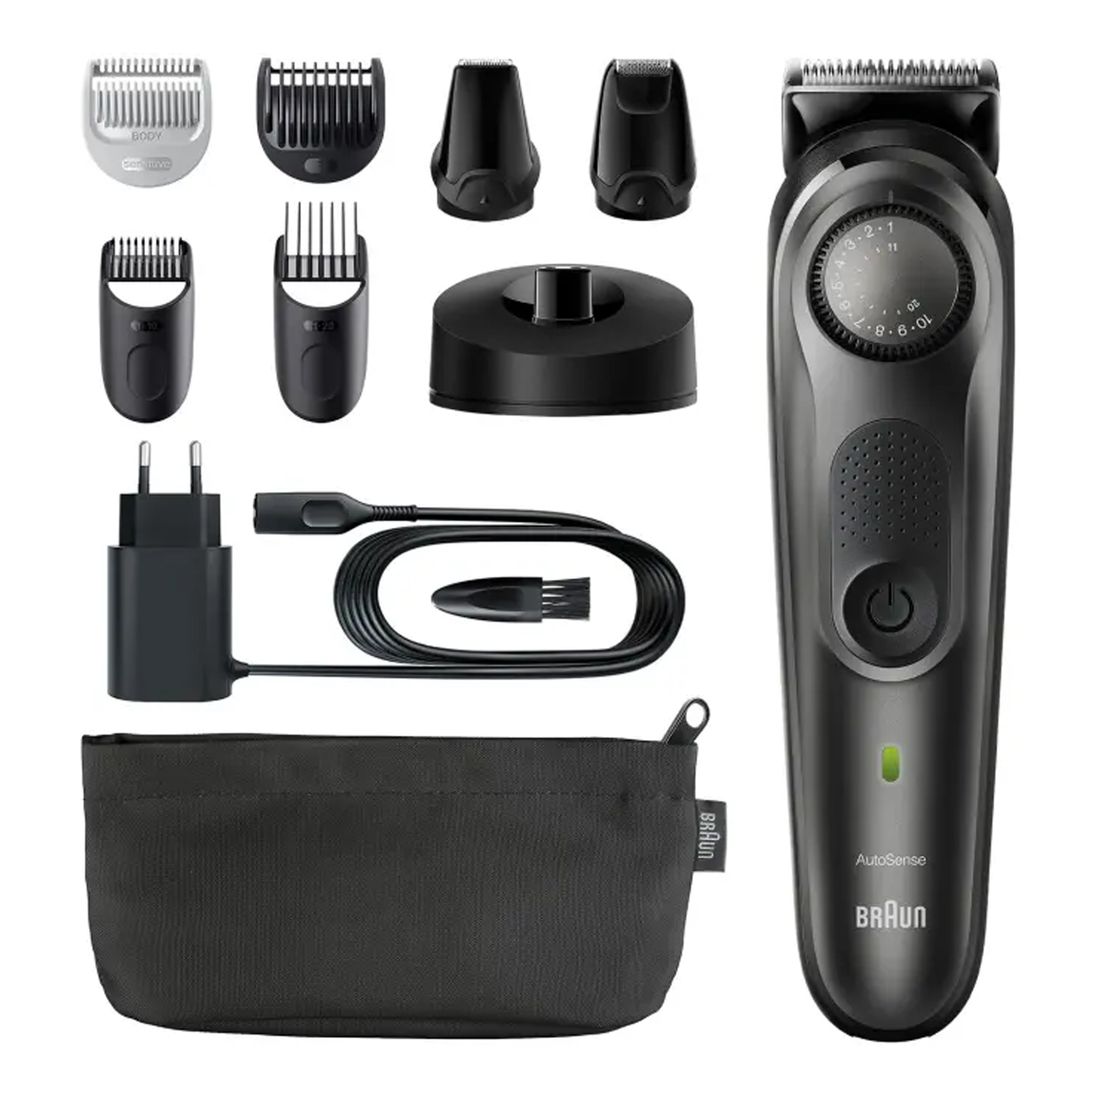 Braun Beard trimmer BT7350 with Precision dial and 7 attachments